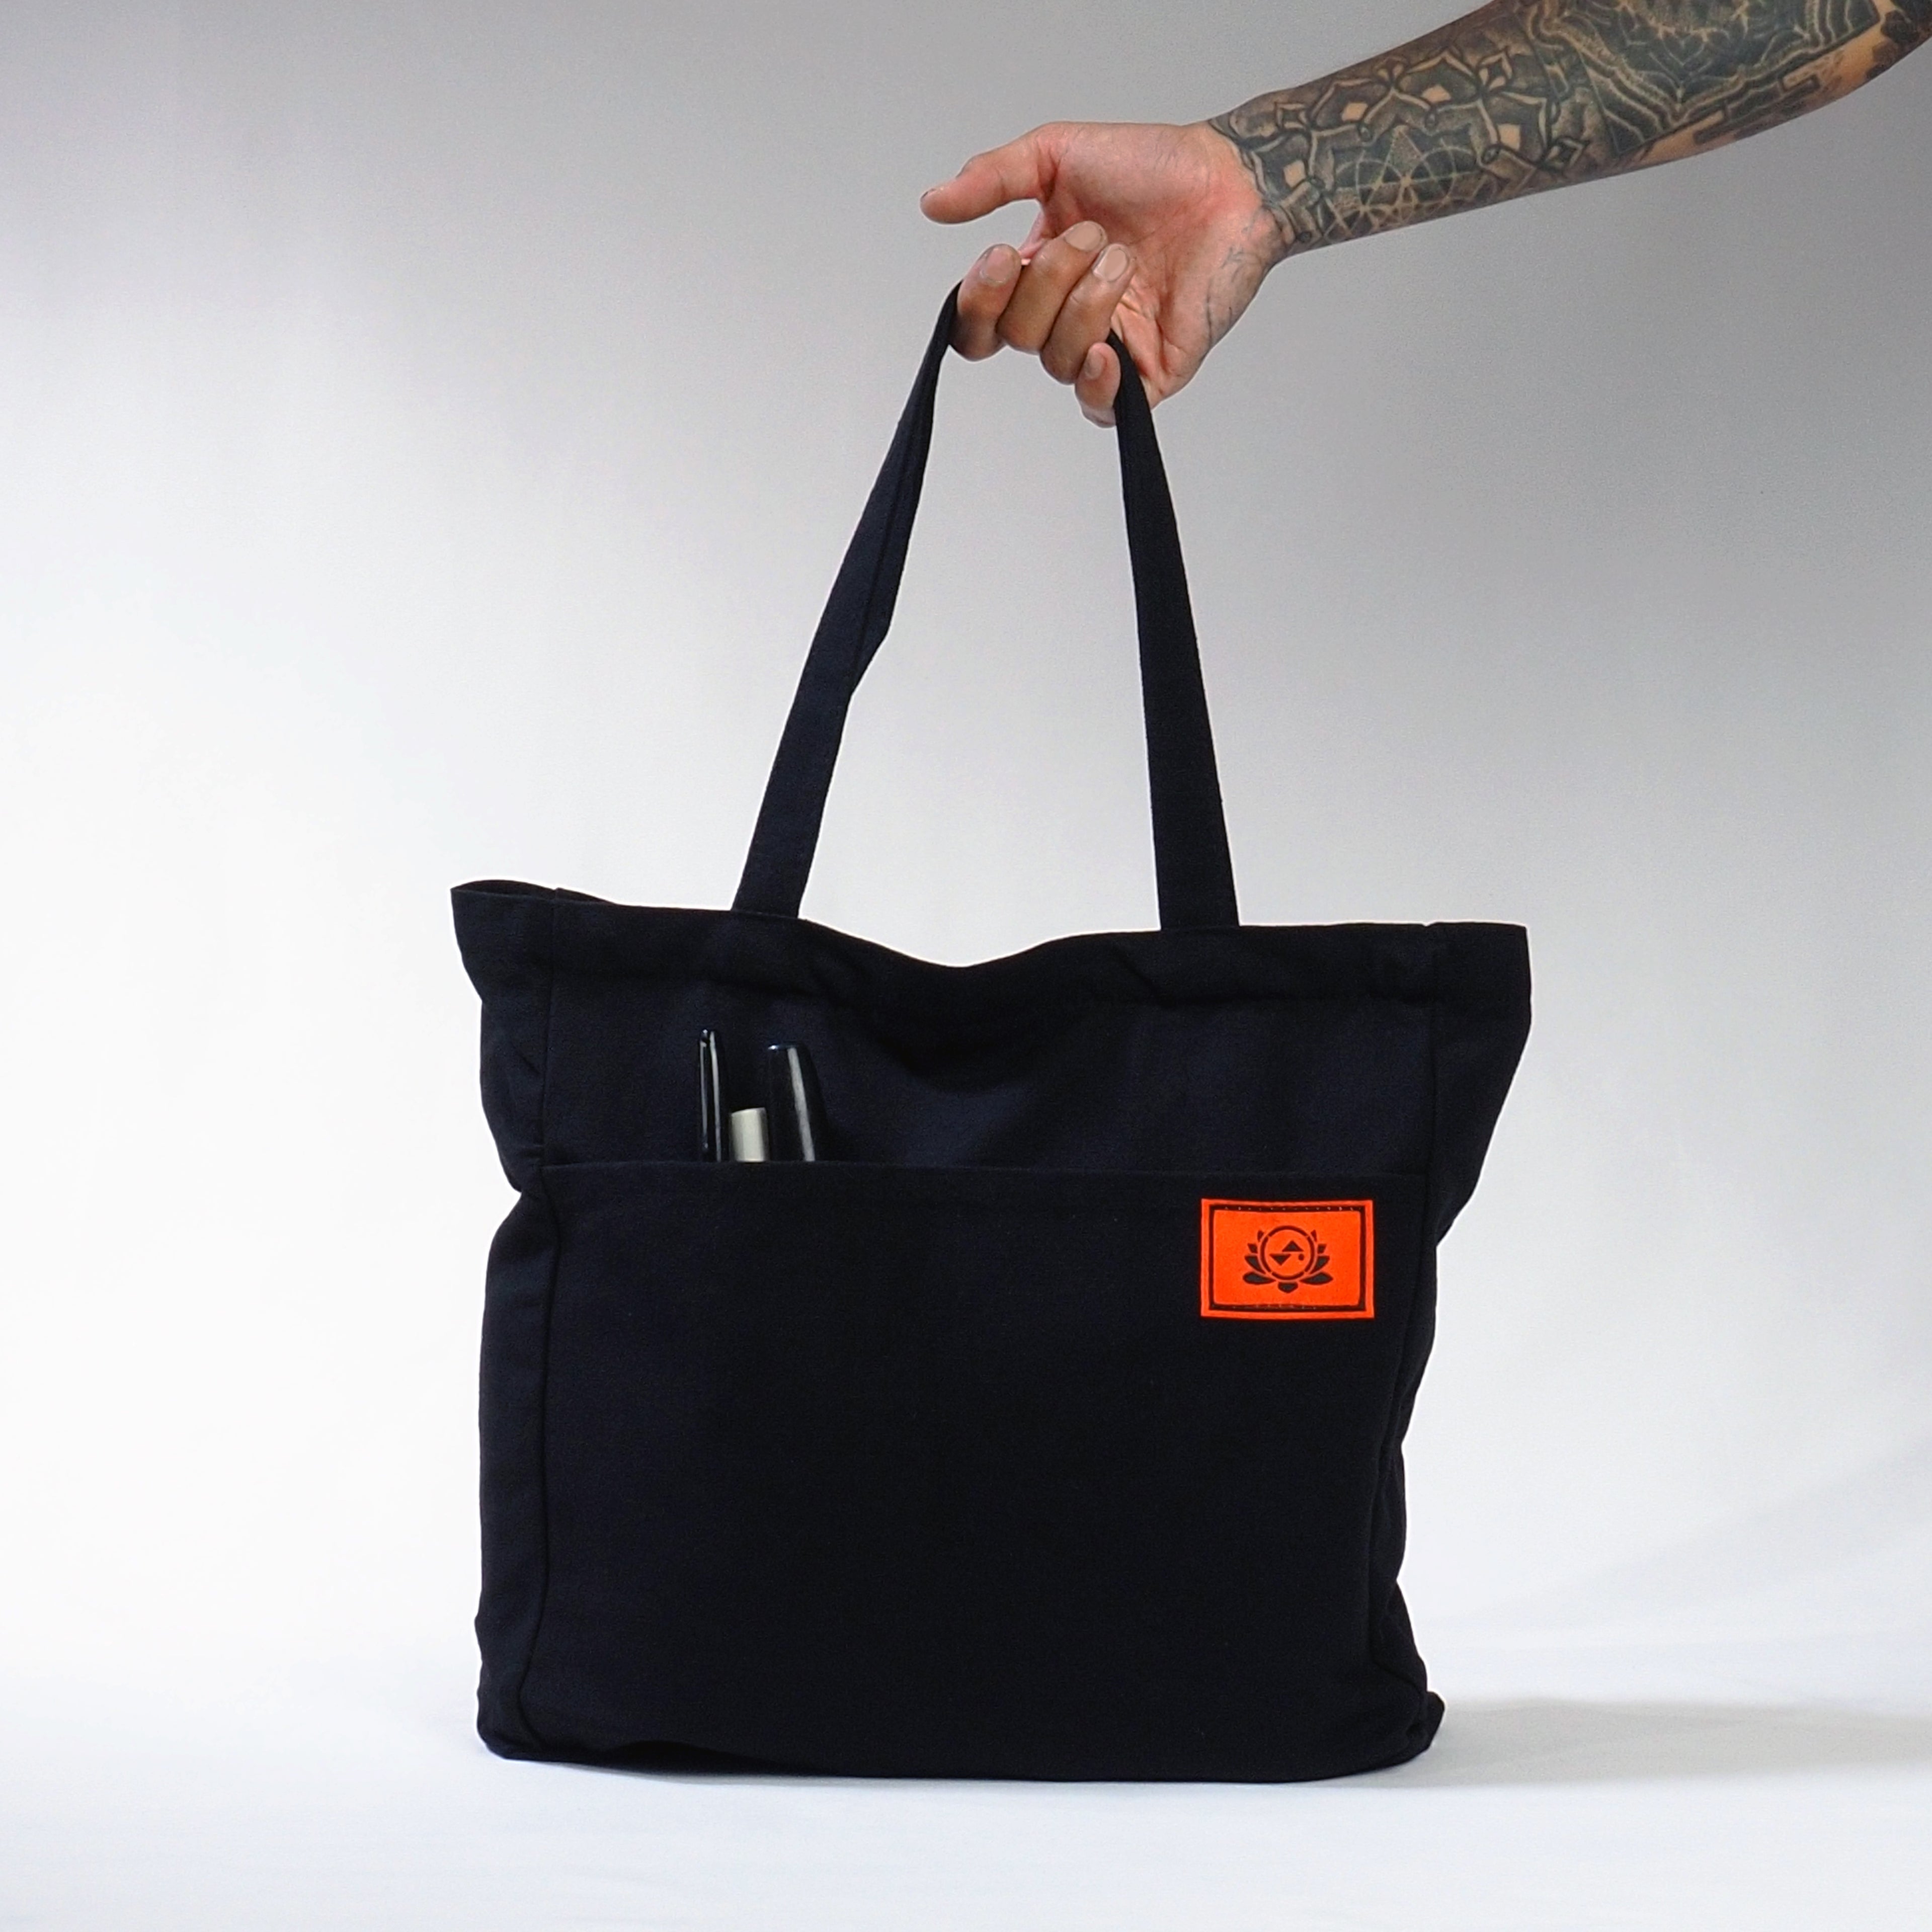 Handy Tote